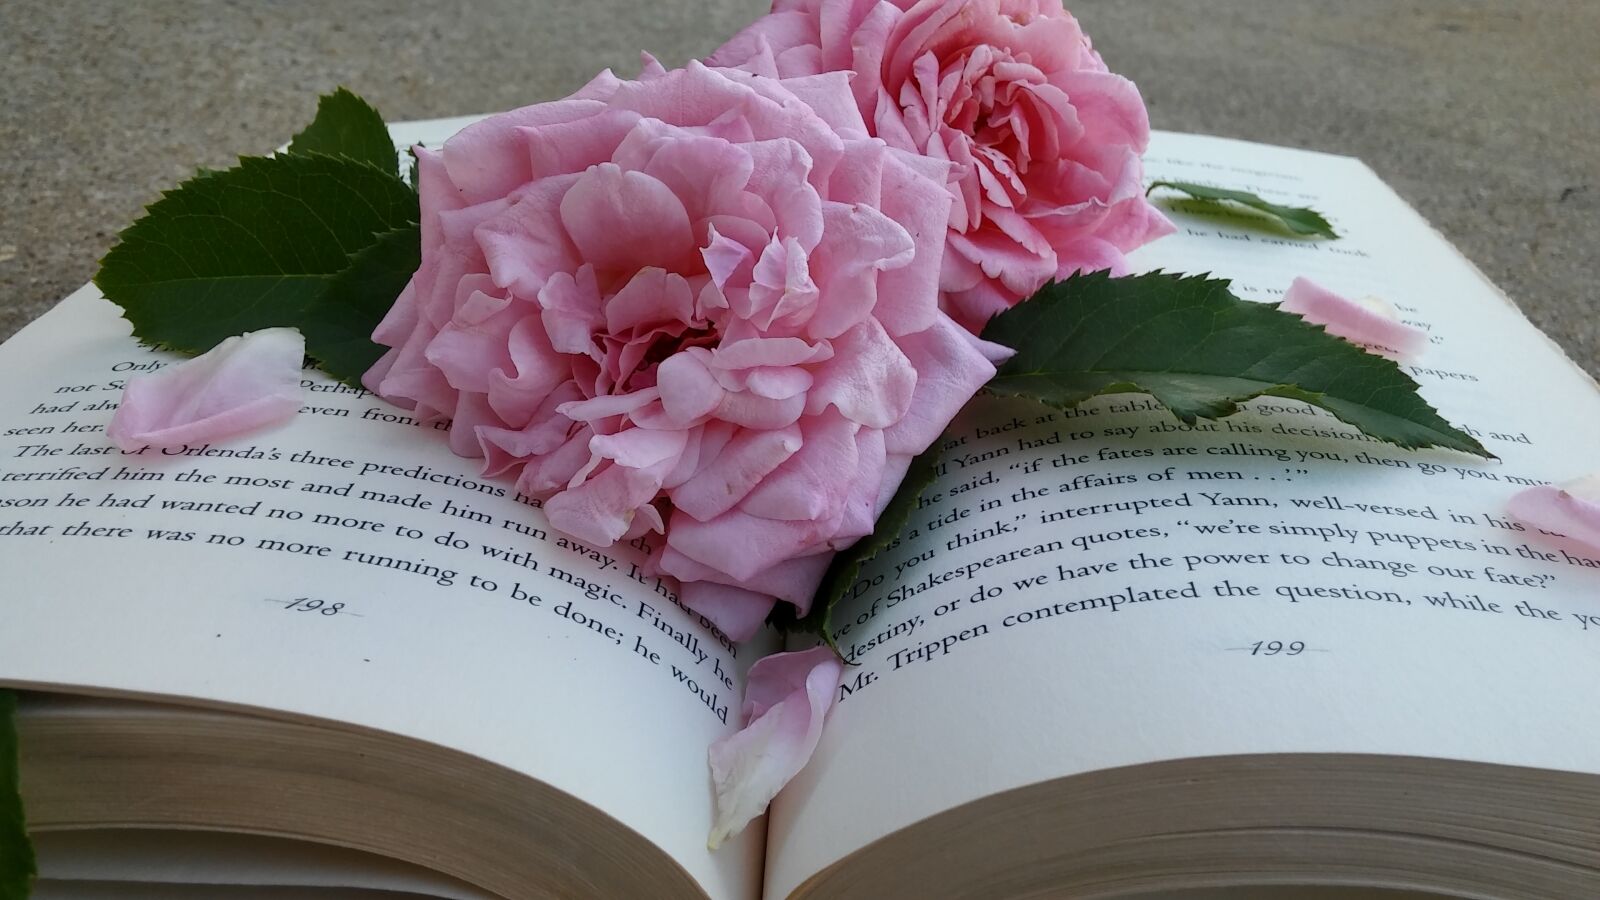 LG G STYLO sample photo. Pink roses, book, flower photography